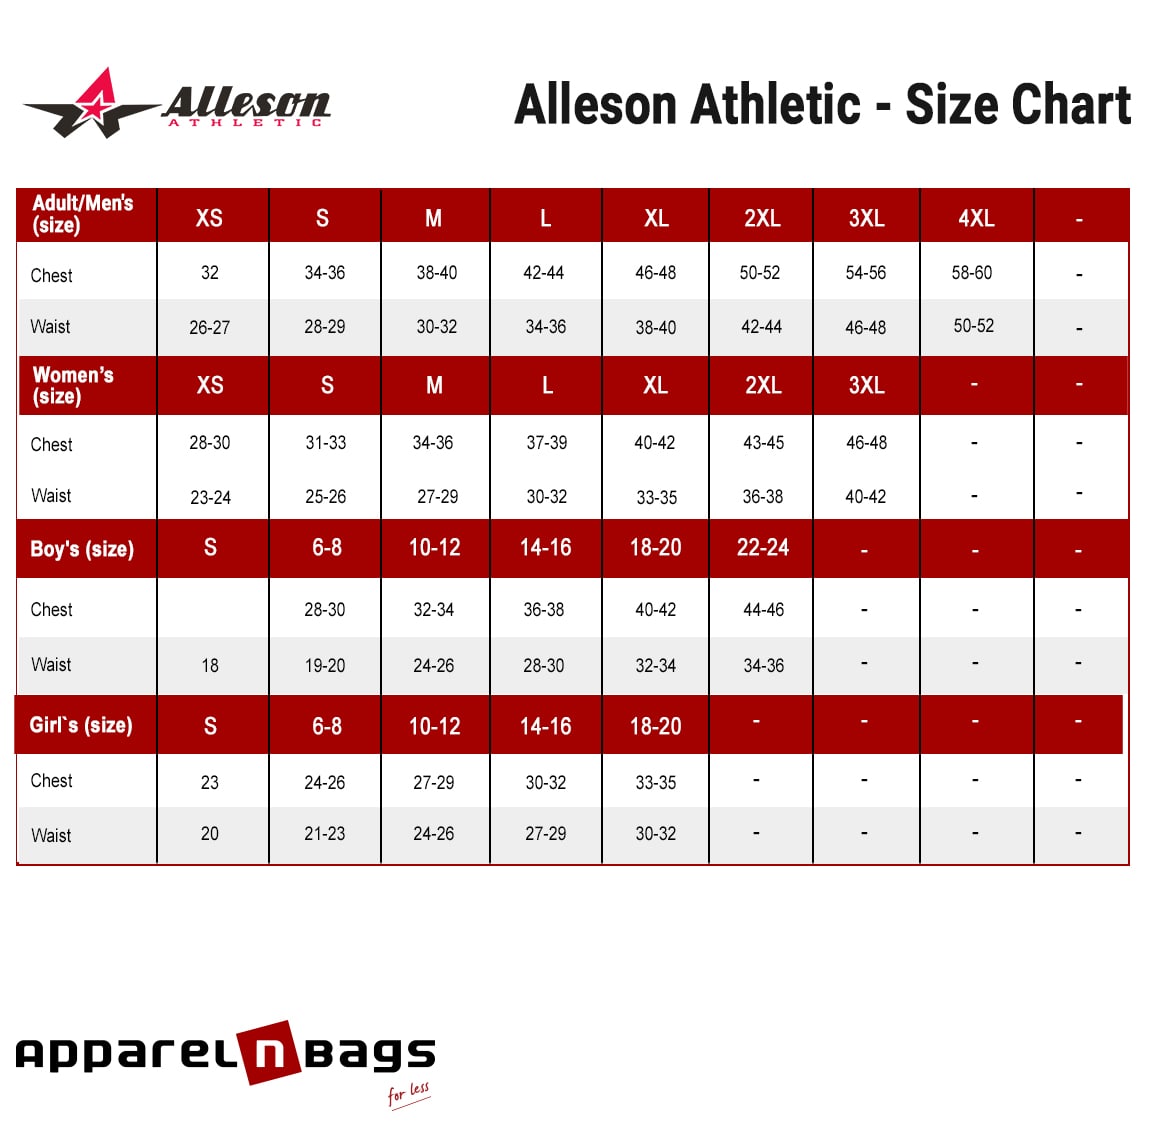 Alleson Athletic - Size Chart